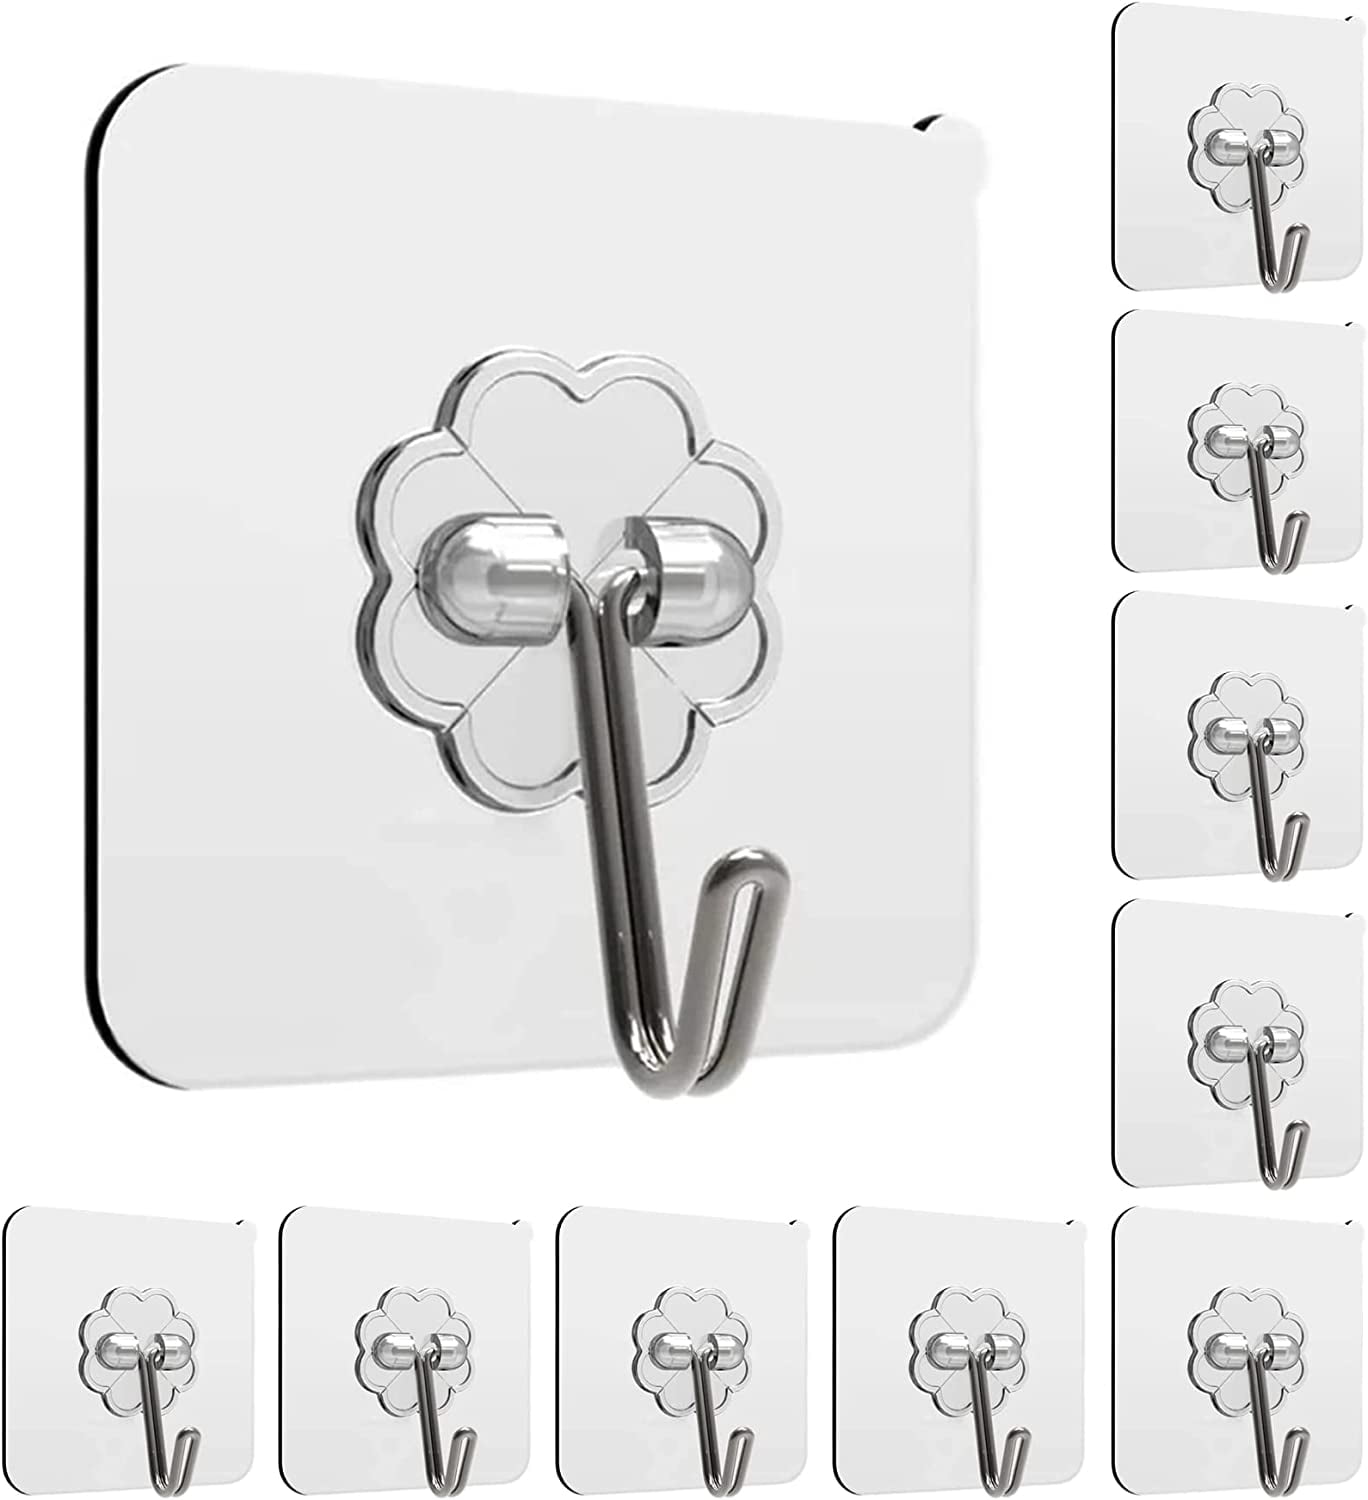 Adhesive Hooks Hanging Ceiling & Wall: Heavy Duty Damage-Free No-Drill Removable Self-Stick Wall Hook 6Pack White Hanger Plants Lights Bags Towels